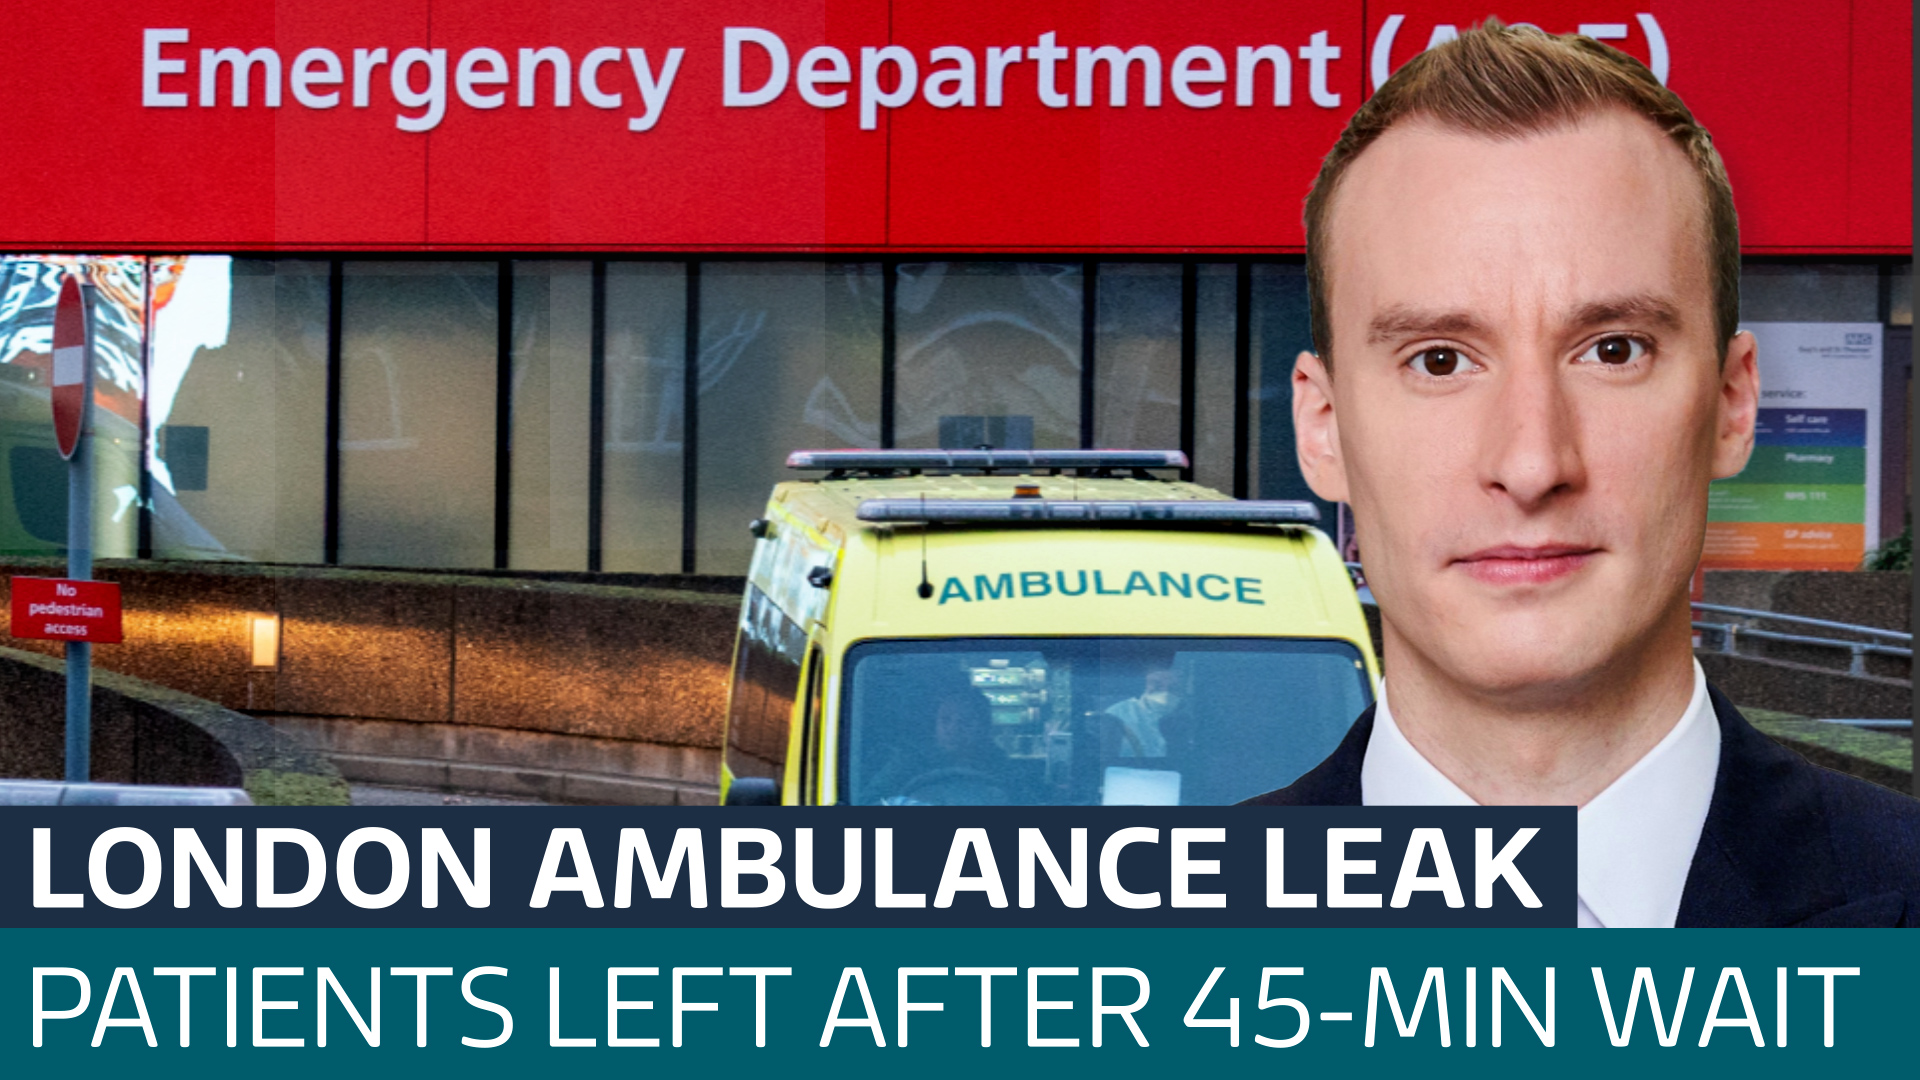 Ambulance crews in London will only wait 45 minutes at A&Es if patient is  stable, leaked letter